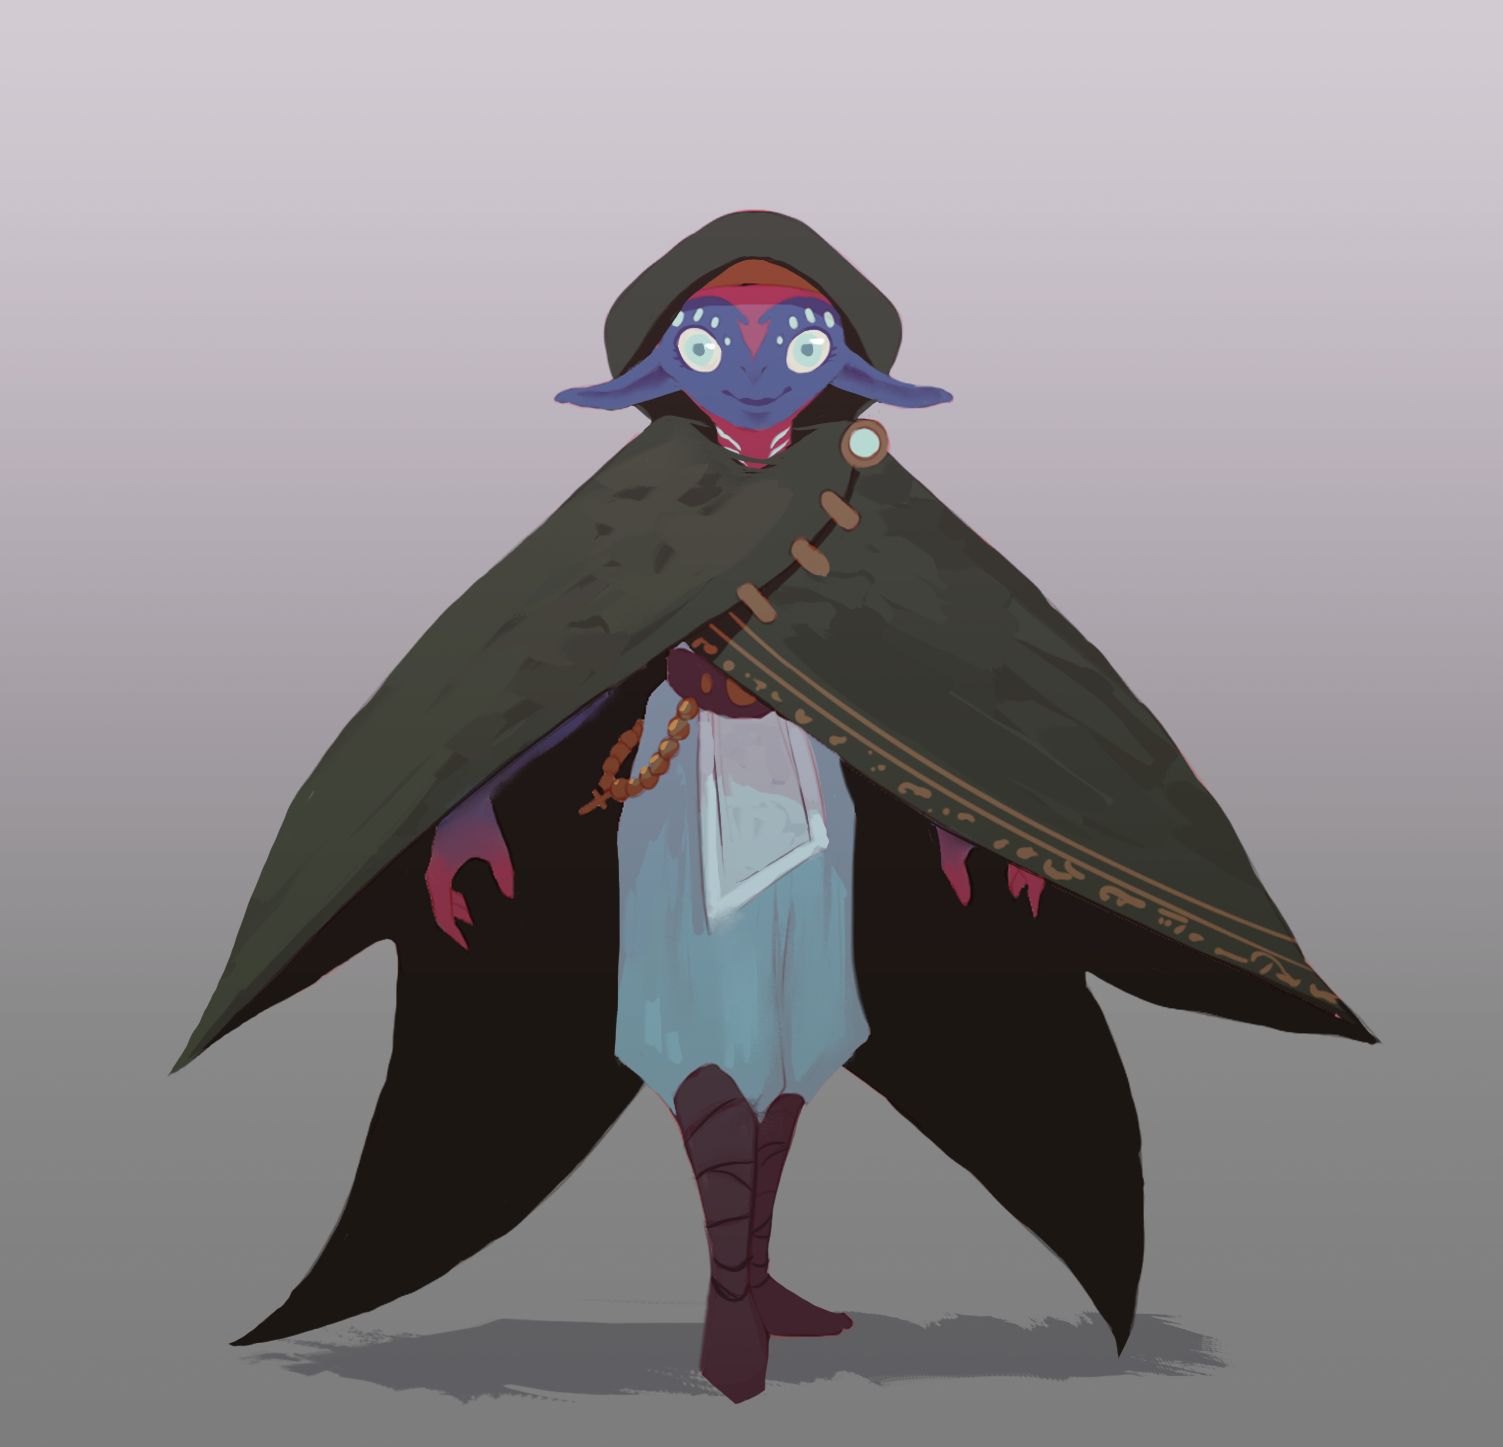 BA Games artwork by Charlotte Hinkins, Depicts a petite character with large ears and mystical body markings hiding under a large wing shaped cloak.